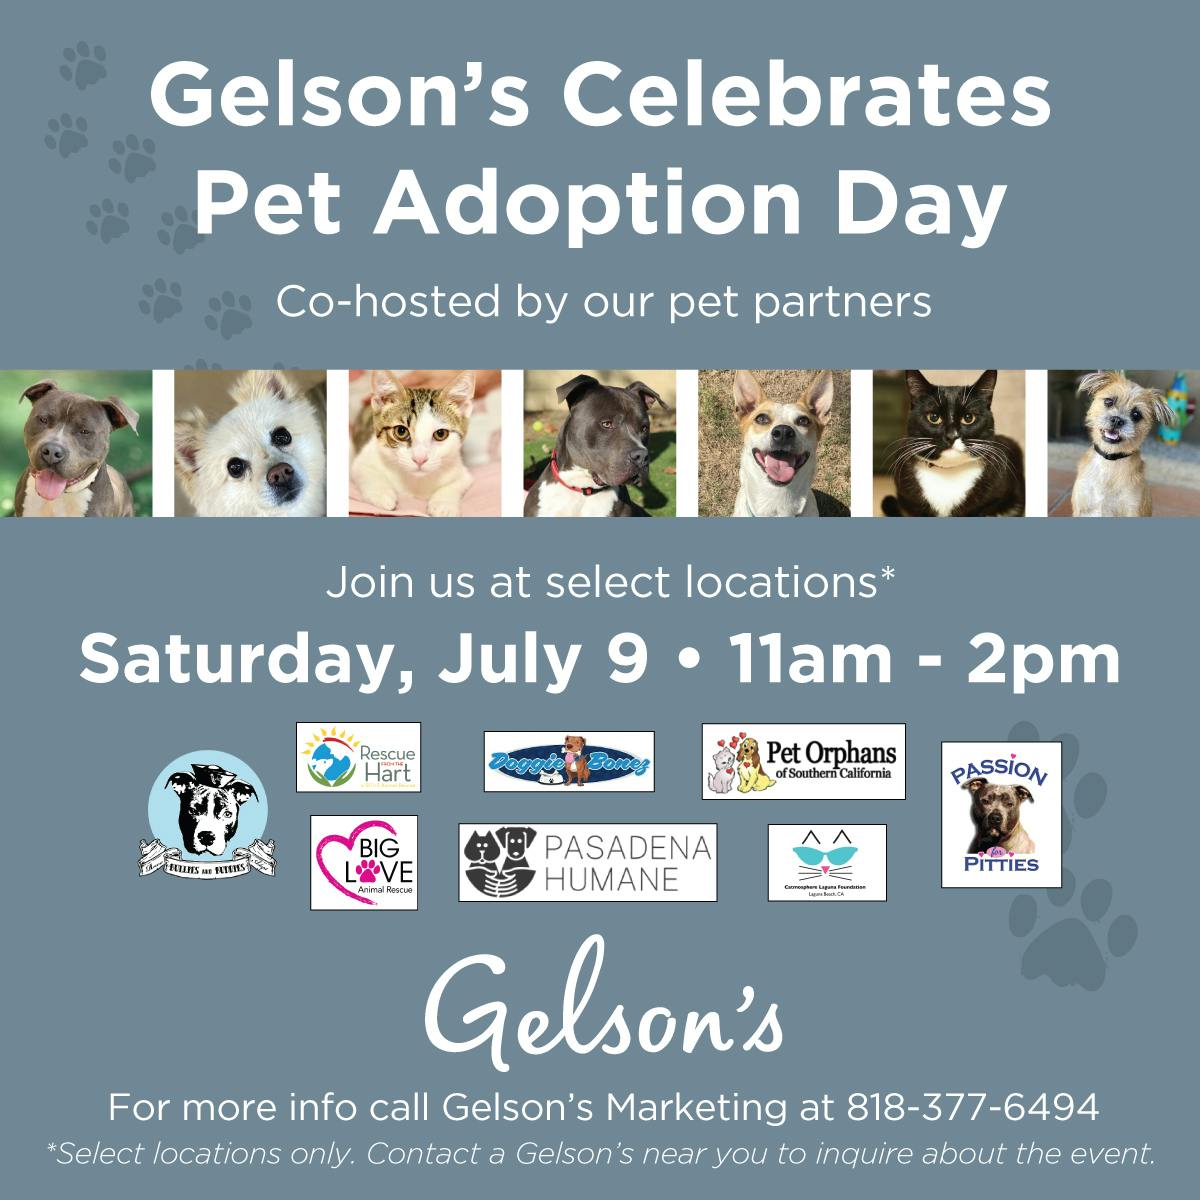 Gelson's loves animals, and we work with nearly a dozen pet rescue groups throughout various store locations. We will be hosting pet adoption events at the following Gelson's locations w/ the corresponding co-hosts on July 9 from 11am-2pm: ◉ La Cañada Flintridge - Pasadena Humane Society ◉ Laguna Beach - Catmosphere Laguna Foundation ◉ Manhattan Beach - Bullies and Buddies ◉ Pacific Beach - Passion 4 Pitties ◉ Rancho Mission Viejo - Doggie Bonez Rescue ◉ Santa Monica - The Forgotten Dog ◉ Sherman Oaks - Rescue from the Hart ◉ Thousand Oaks - Paw Works ◉ Valley Village/Noho - Big Love Animal Rescue If you are interested in adopting and adding a furry member to the family, please come out! Adopt. Foster. Save a life.